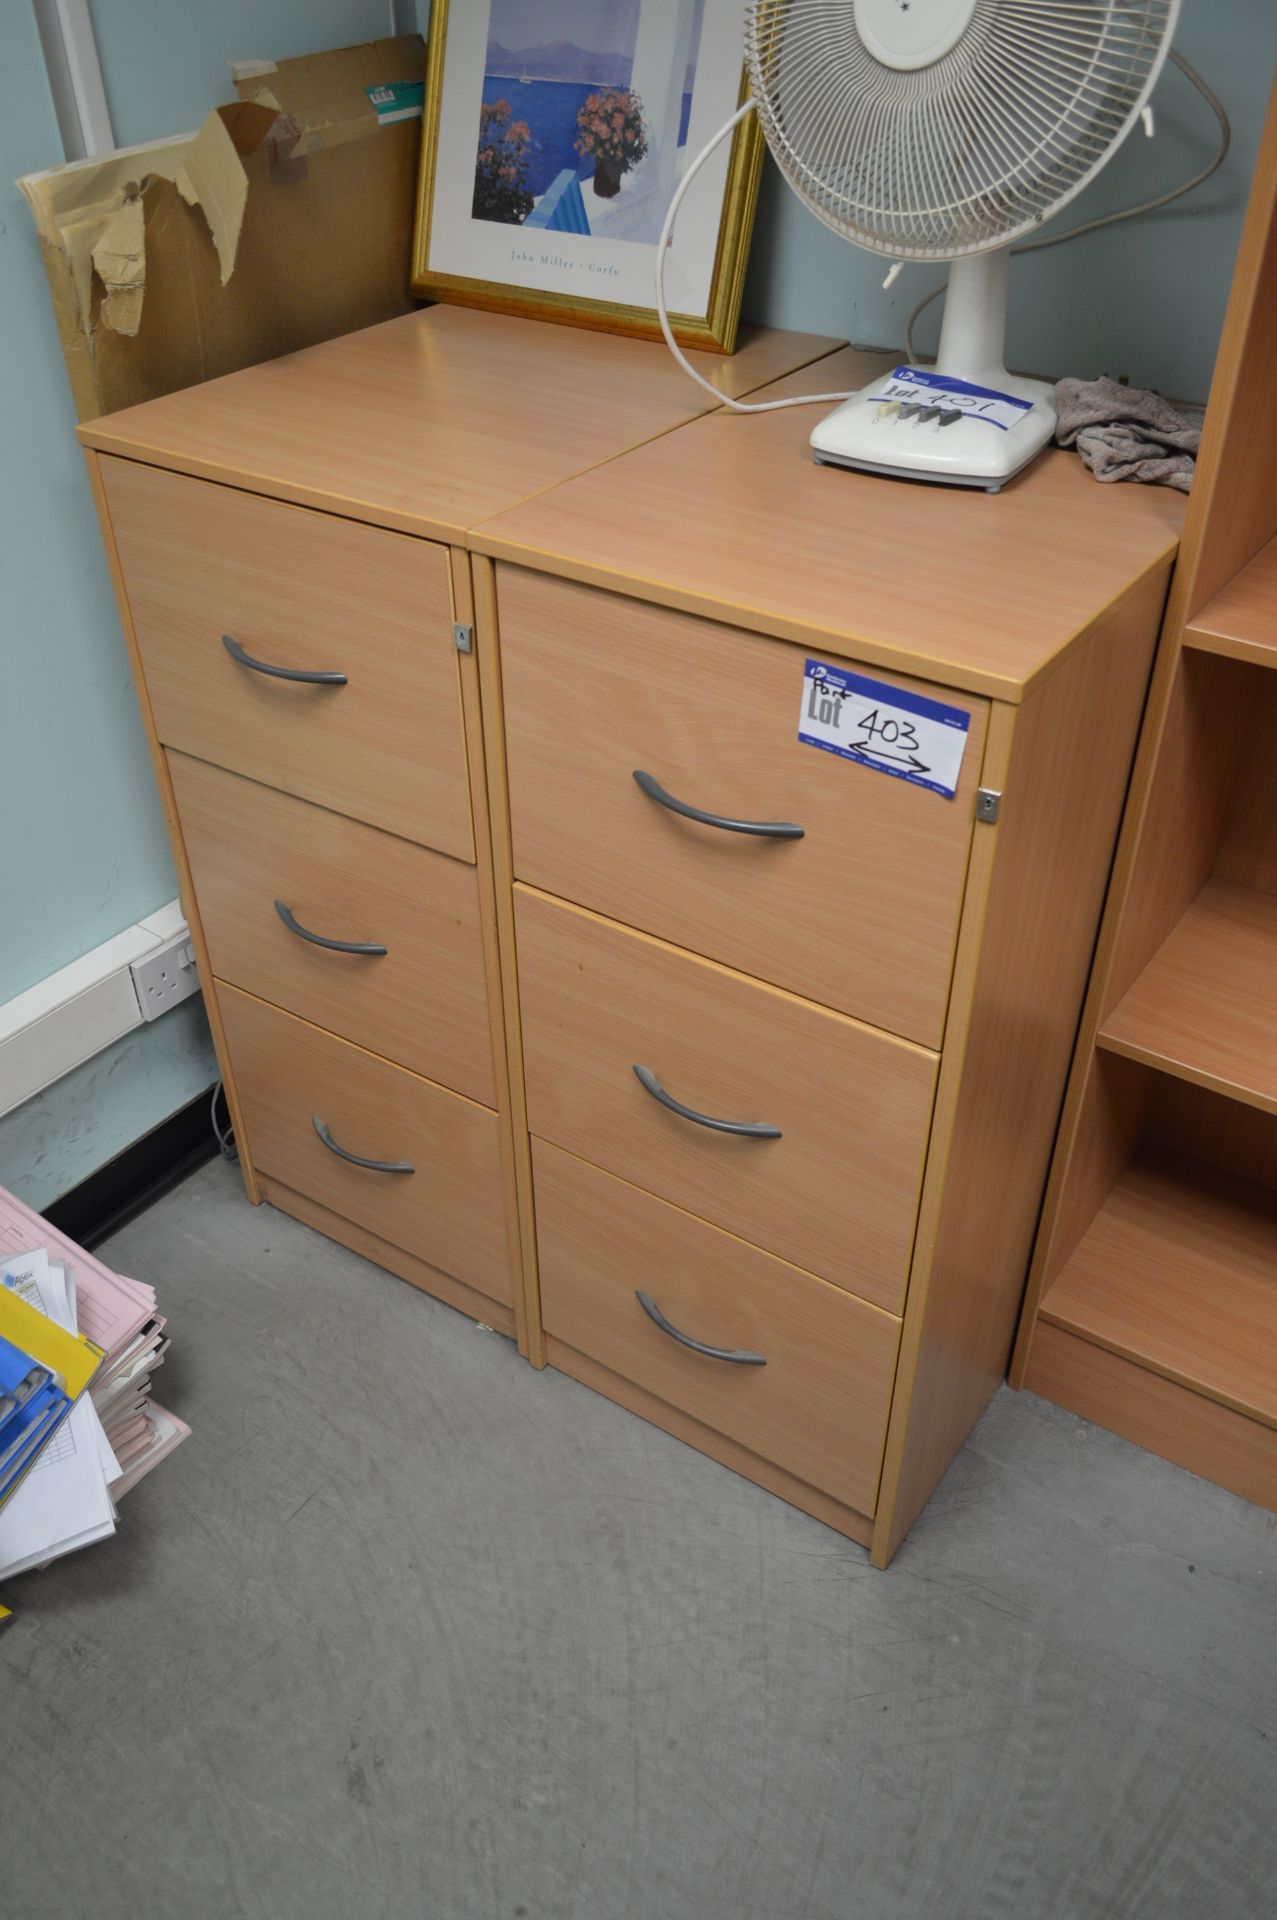 Remaining Loose Office Furniture Contents of Room, - Image 3 of 4